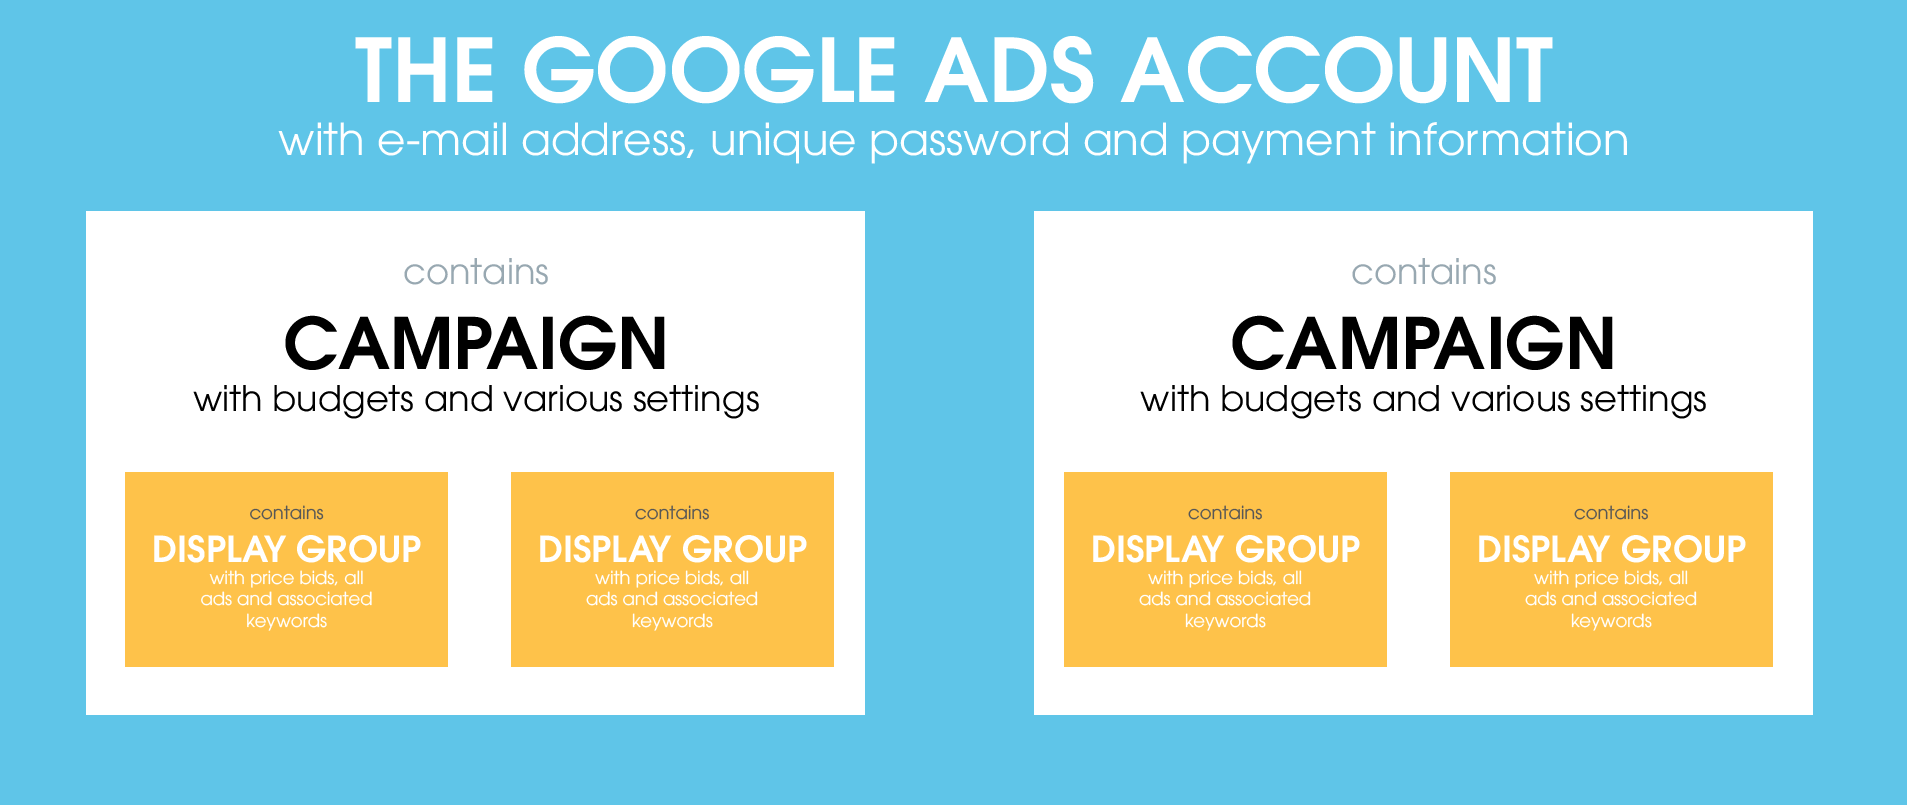 In the graphic you can see the structure of a Google Ads account. It contains different campaigns, which in turn contain ad groups where the price bids, ads and keywords can be found.